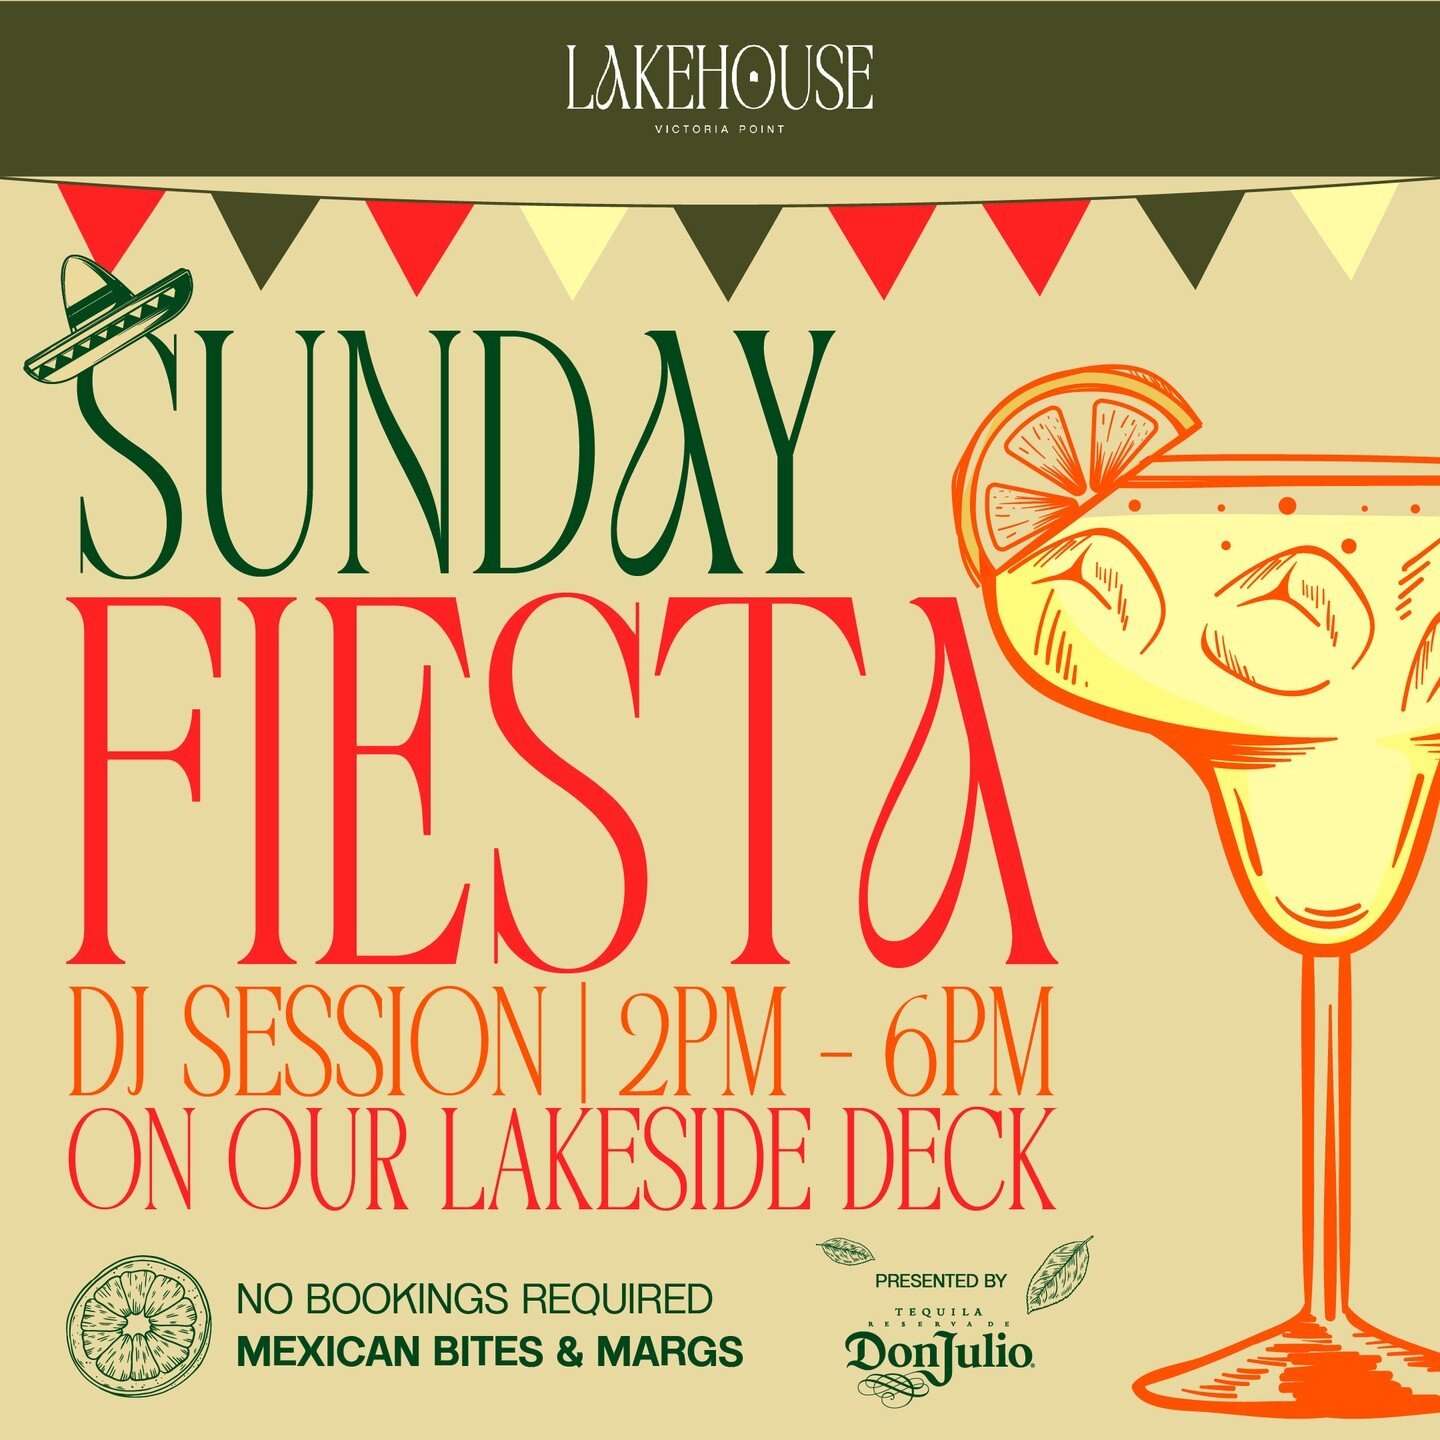 Sundays just got a whole lot better! Join us at the Lakehouse for our Sunday Fiesta, presented by Don Julio Tequila! 💃🍋

Enjoy margaritas, Mexican tapas, and live tunes on the deck - overlooking the lake! ⚓️

No bookings required &ndash; see you Su